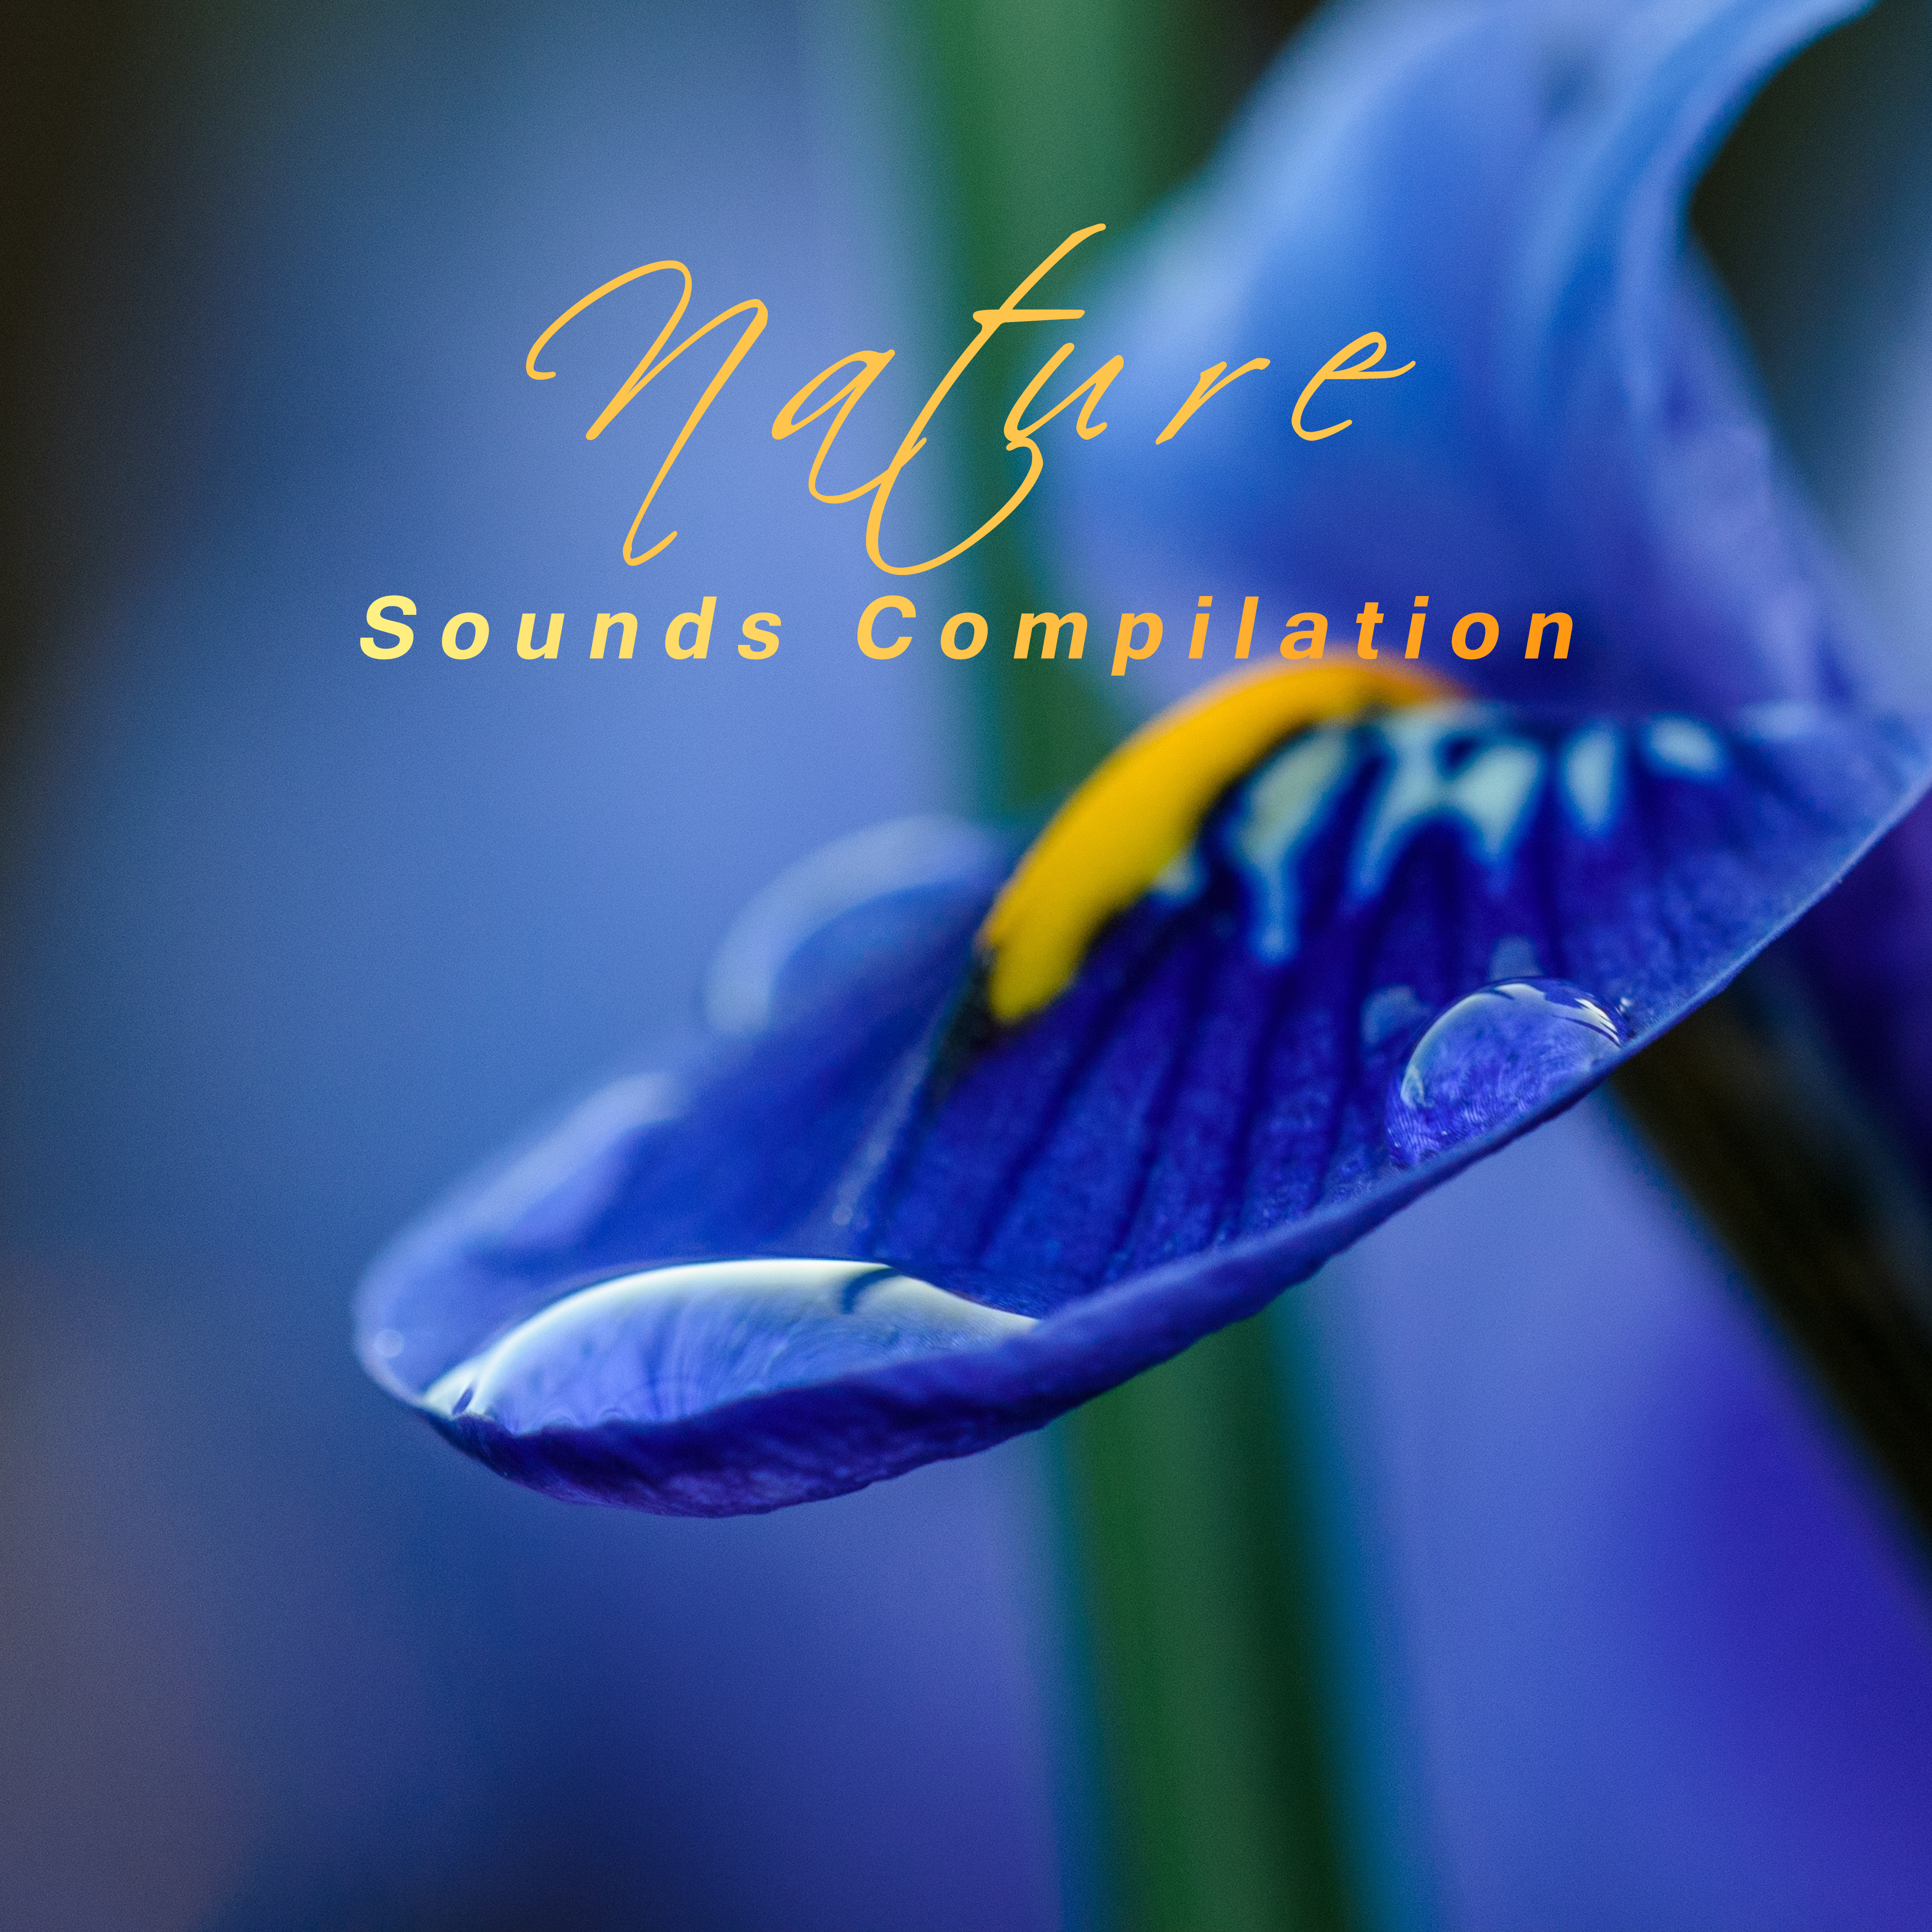 Nature Sounds Compilation  Relaxing Music Therapy, Sounds of Nature, Relaxation  Meditation, Zen